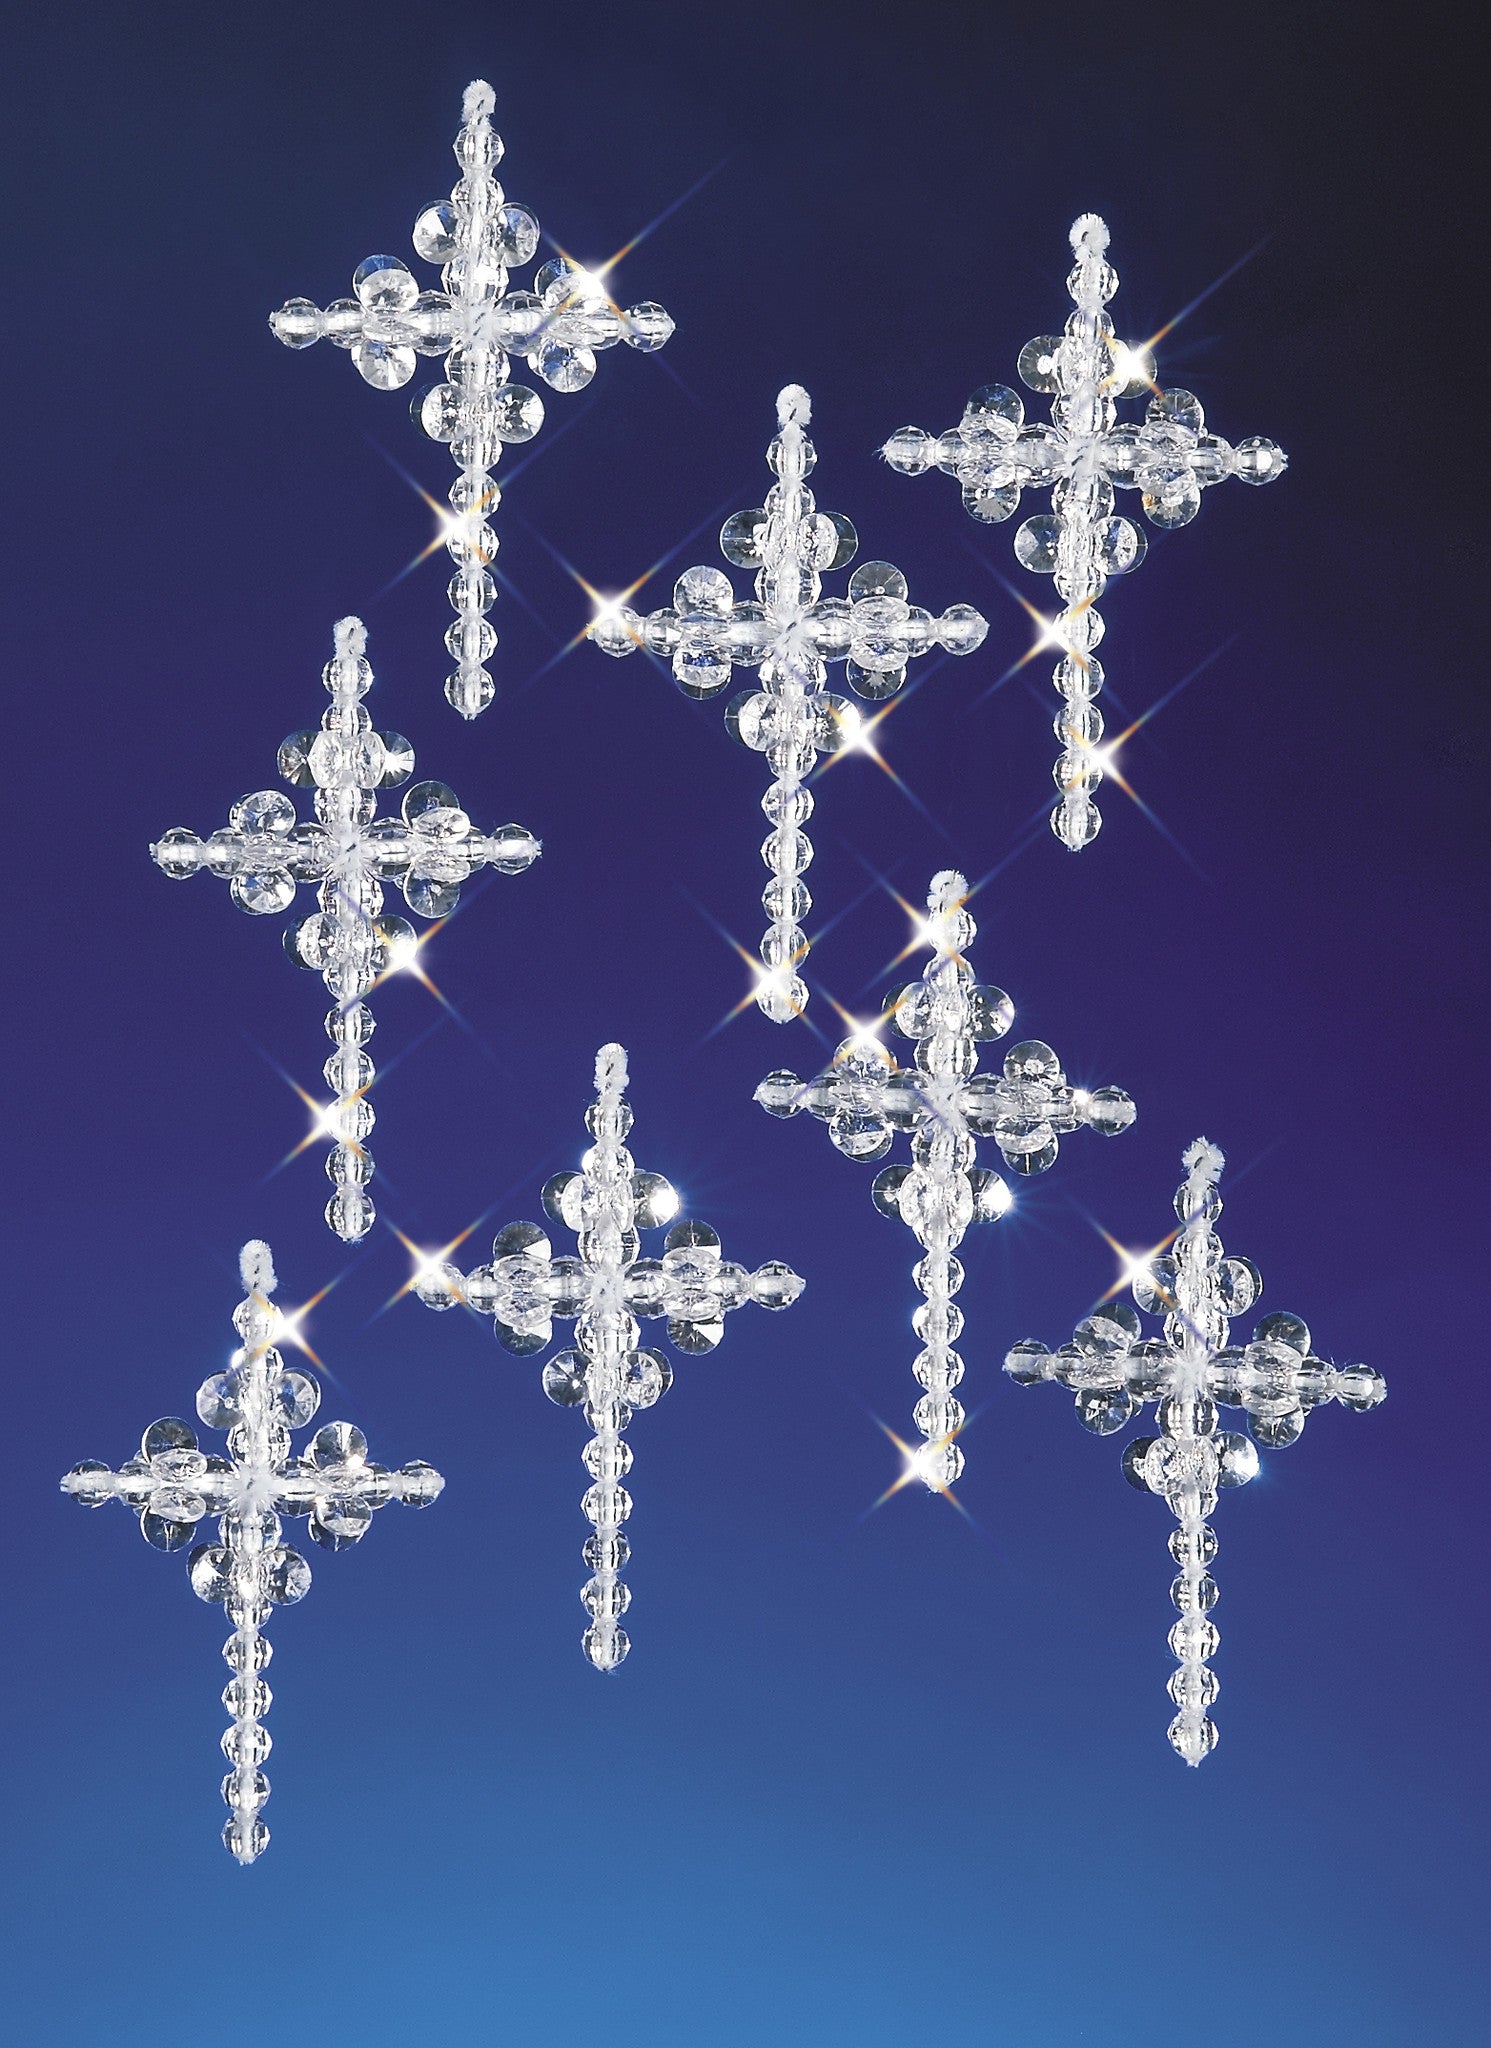 Beadery Holiday Ornament Kit Crystal Crosses #5536 - Beadery Products